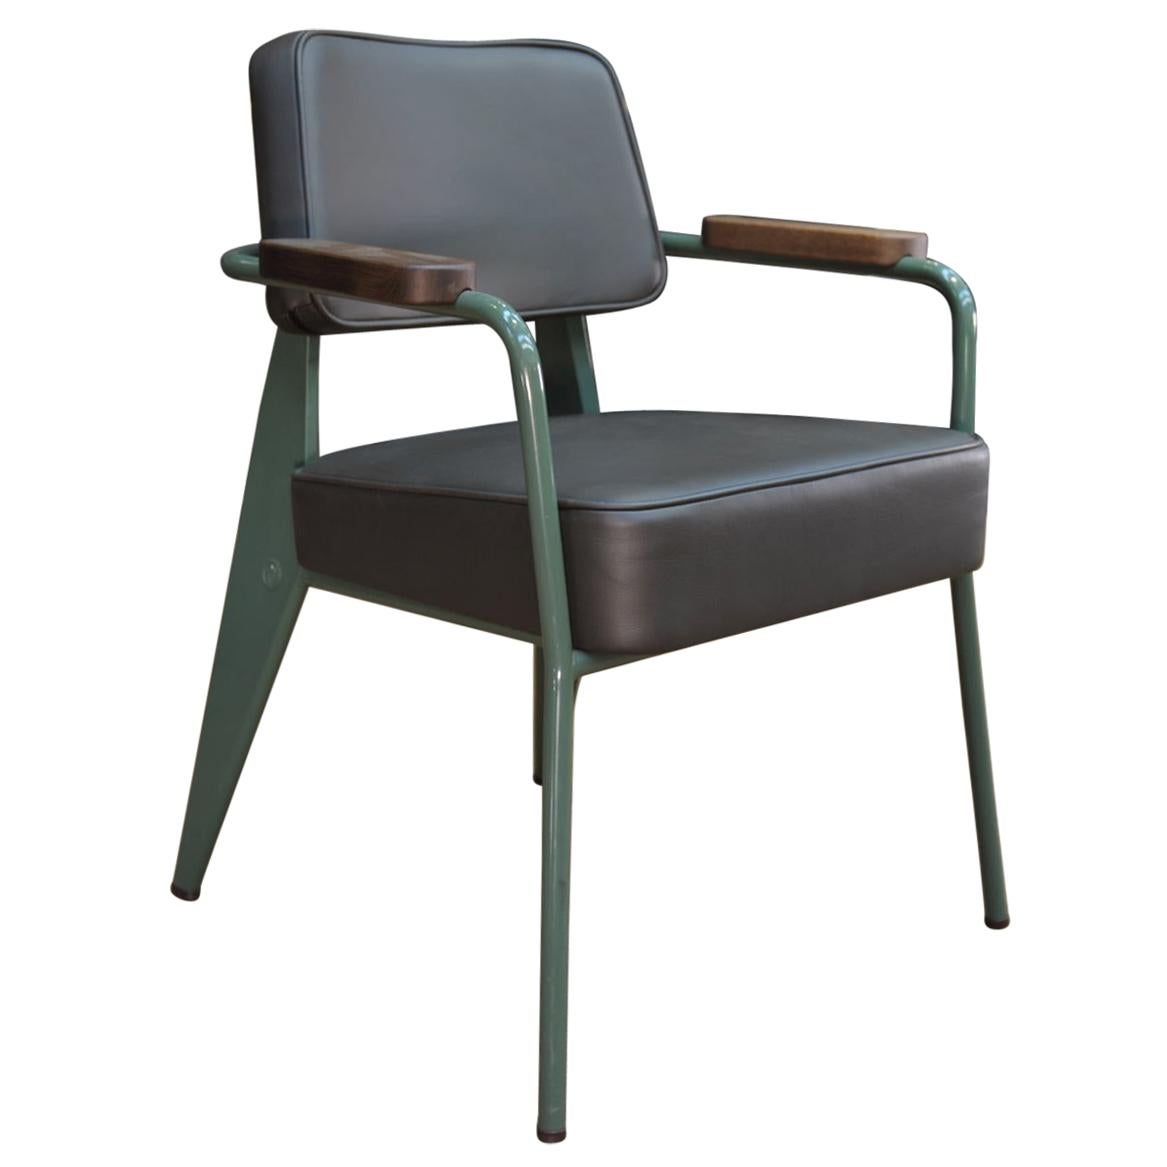 Jean Prouvé Limited Edition Leather Steering Chair by G-Star for Vitra Desk